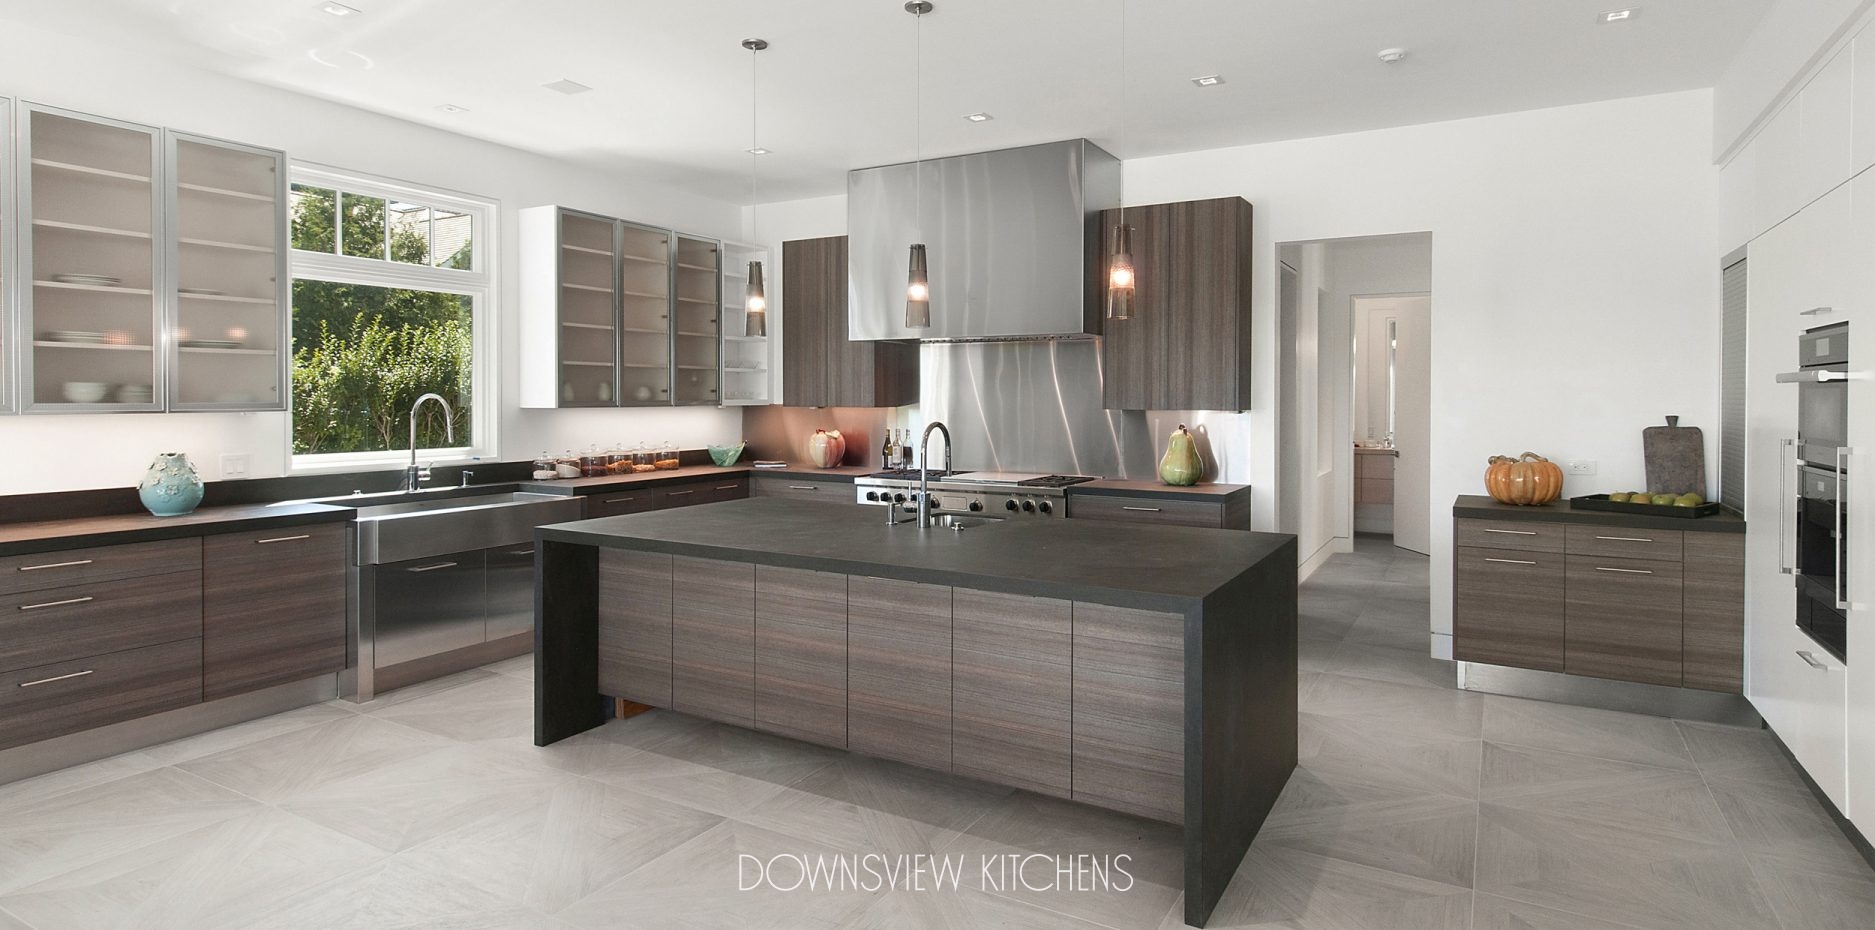 Fresh Perspective Downsview Kitchens